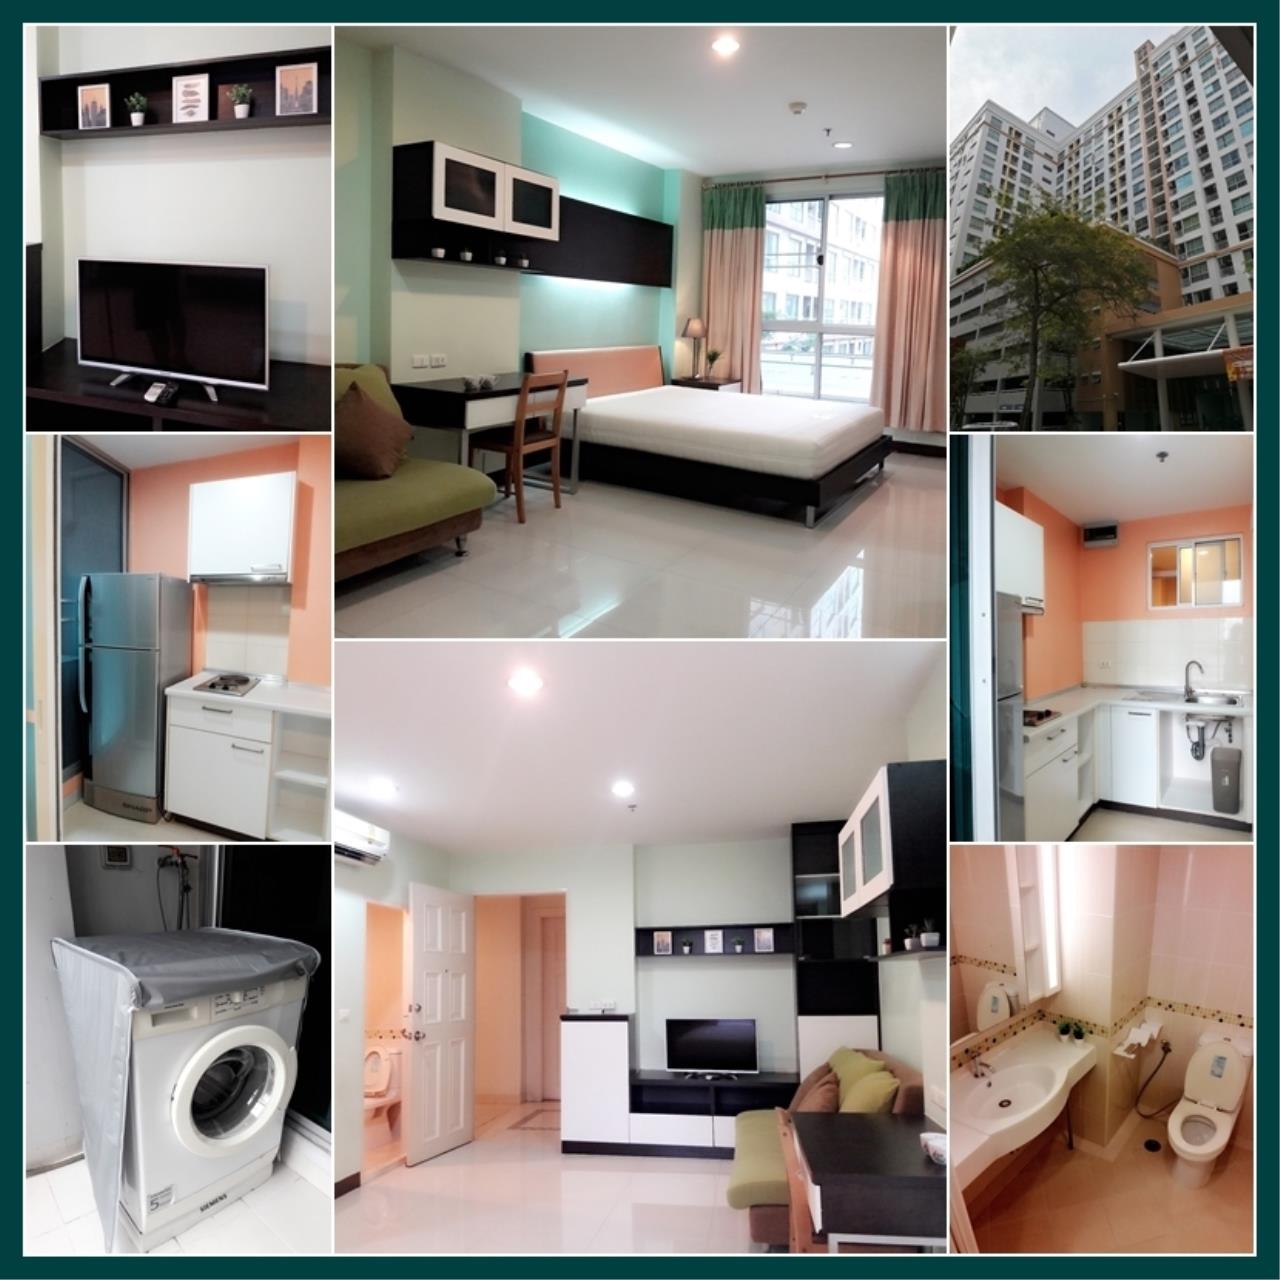 Ta (+66 9 5935 1592) Agency's For Rent condo at BTS Tha Phra 1 Bedroom fully furnished 7,500B/m near Talad Plu and Sathorn, clean and good condotion. 2